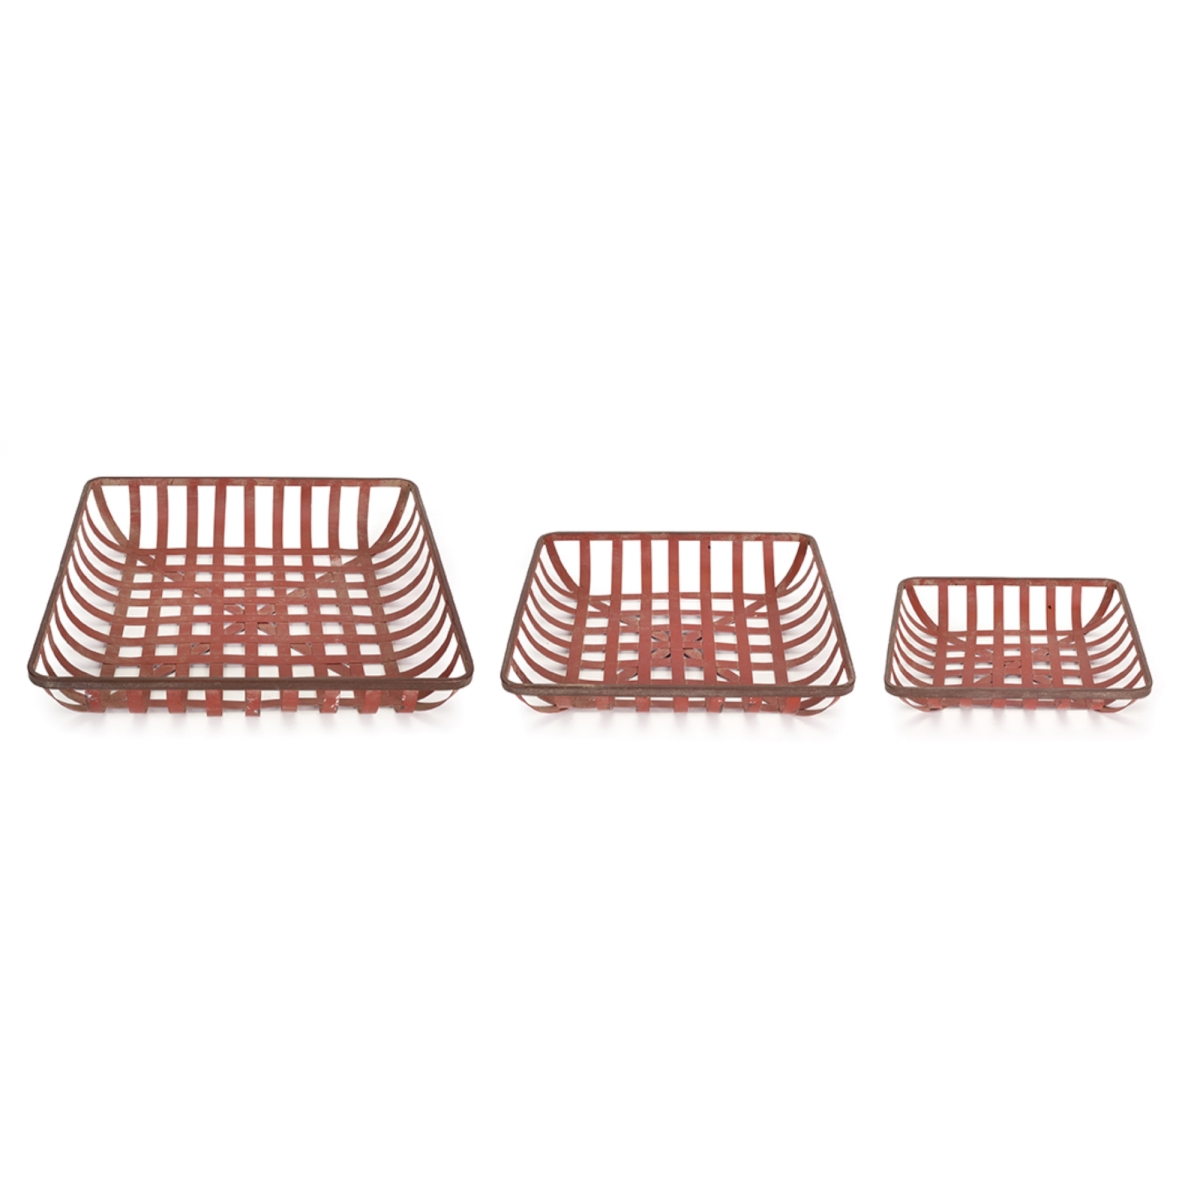 72471ds 13.25 X 15.75 X 18 In. Metal Tray, Red - Set Of 3